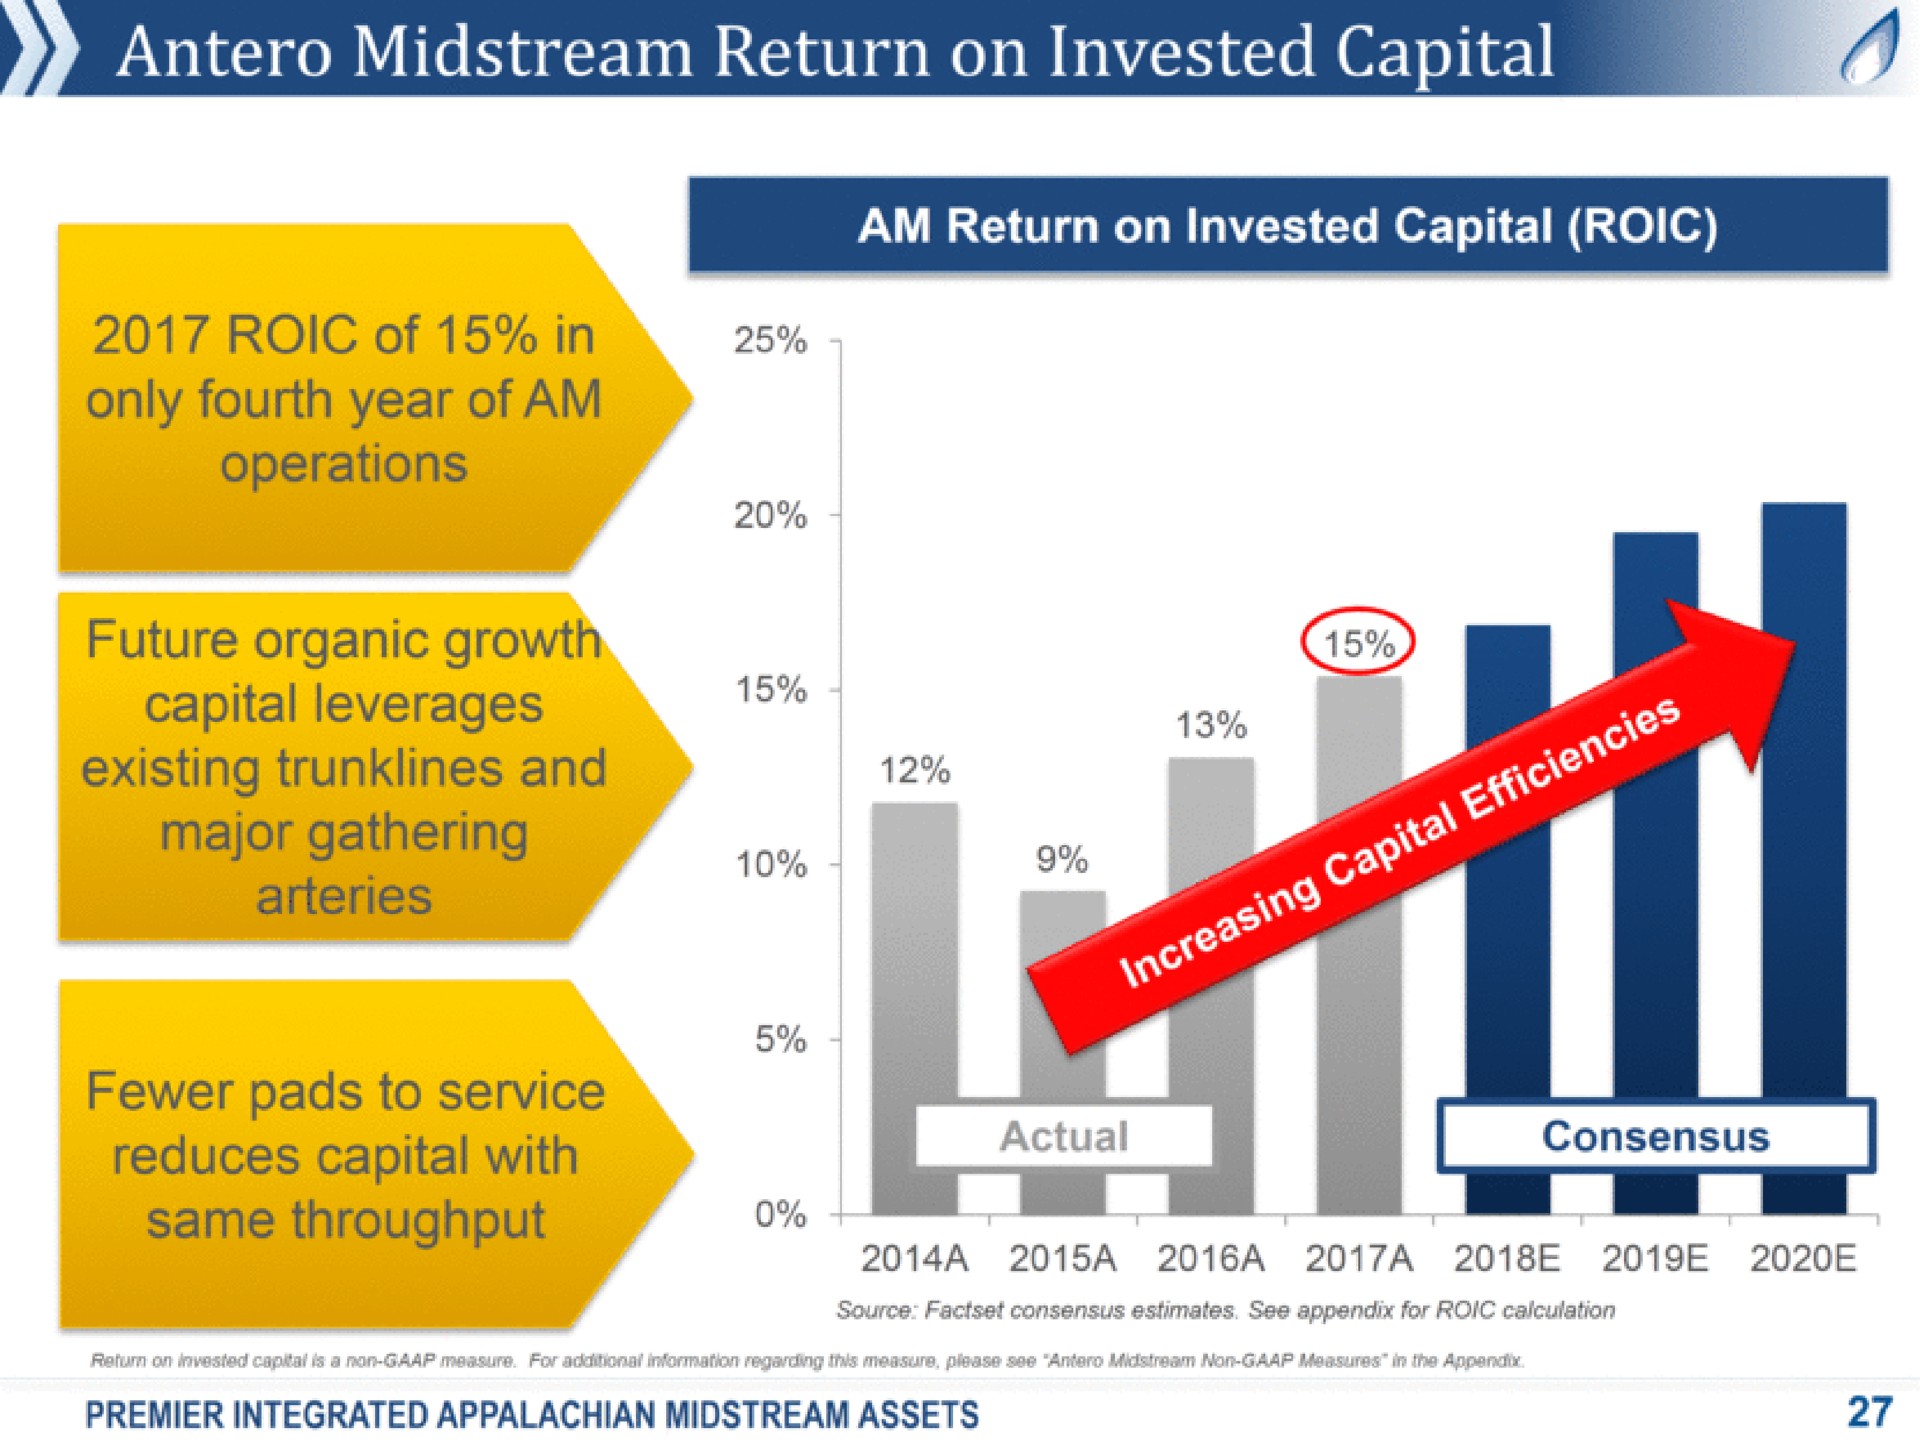 midstream return on invested capital am return on invested capital of in conn of am future organic growth capital leverages pads to service tess a source consensus estimates see appendix for calculation a a on invested can a non measure for information regarding live please non in premier integrated midstream assets | Antero Midstream Partners